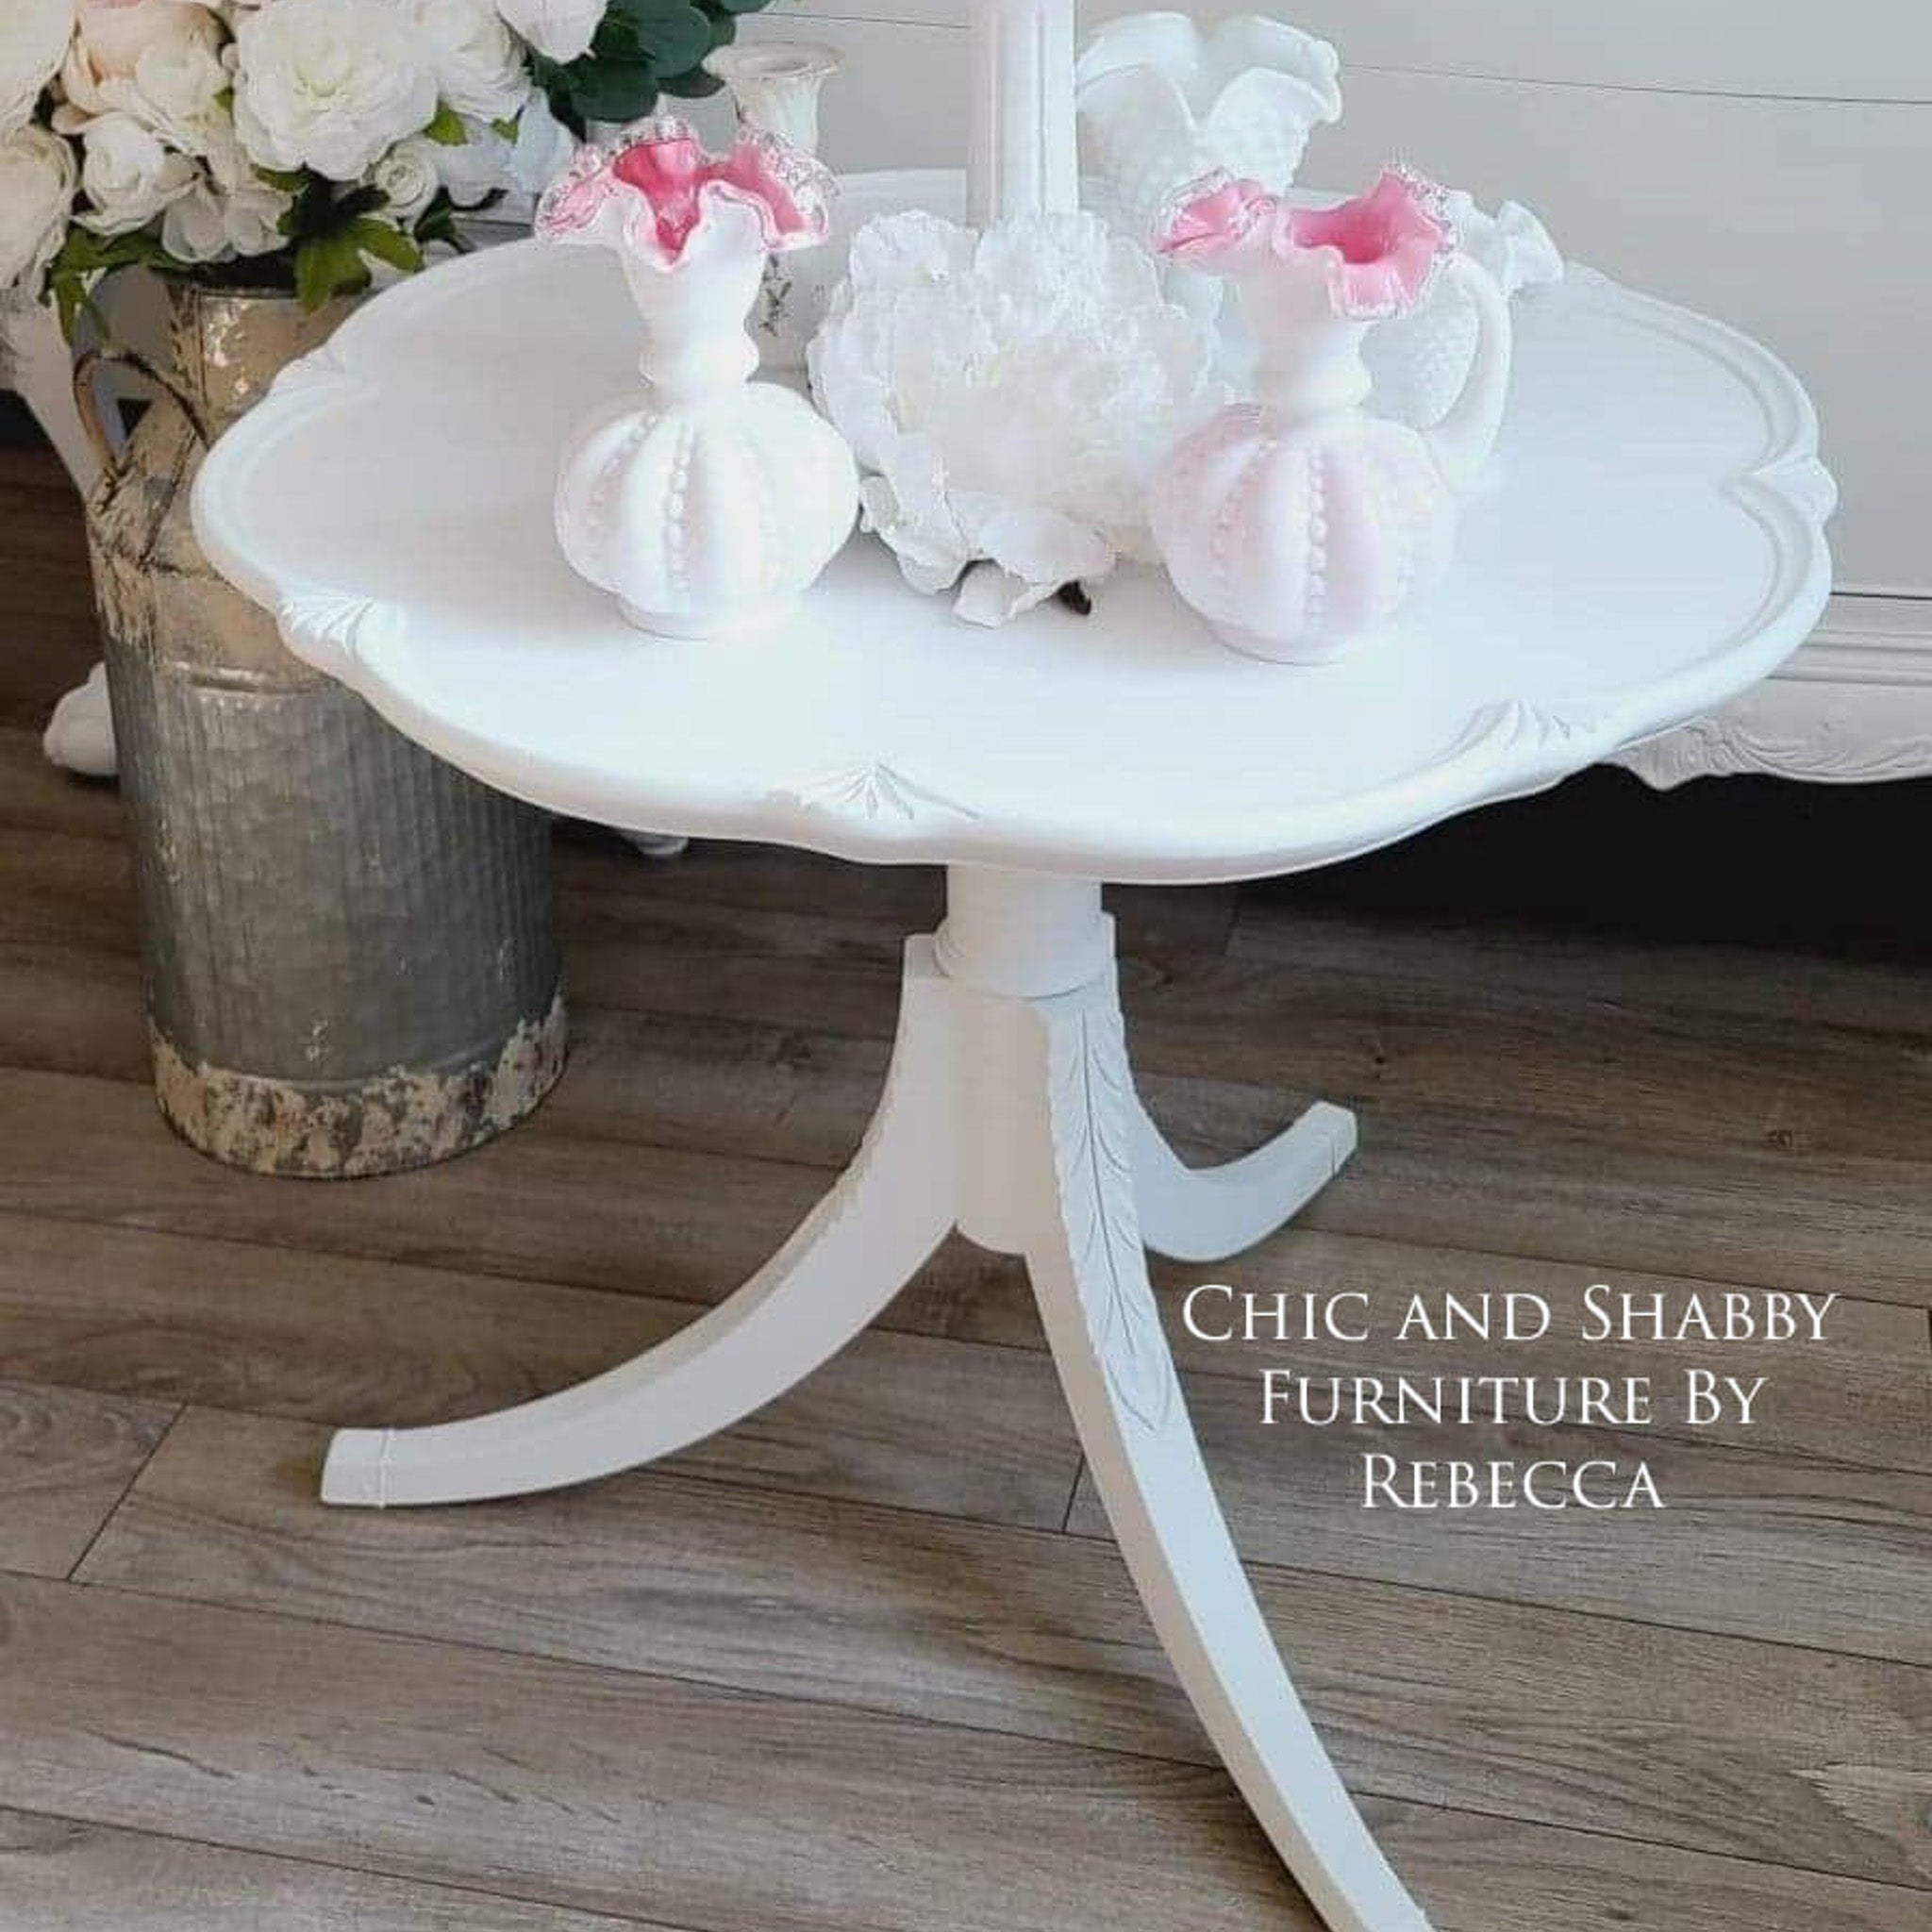 A vintage side table refurbished by Chic and Shabby Furniture by Rebecca is painted in Dixie Belle's Cotton chalk mineral paint.